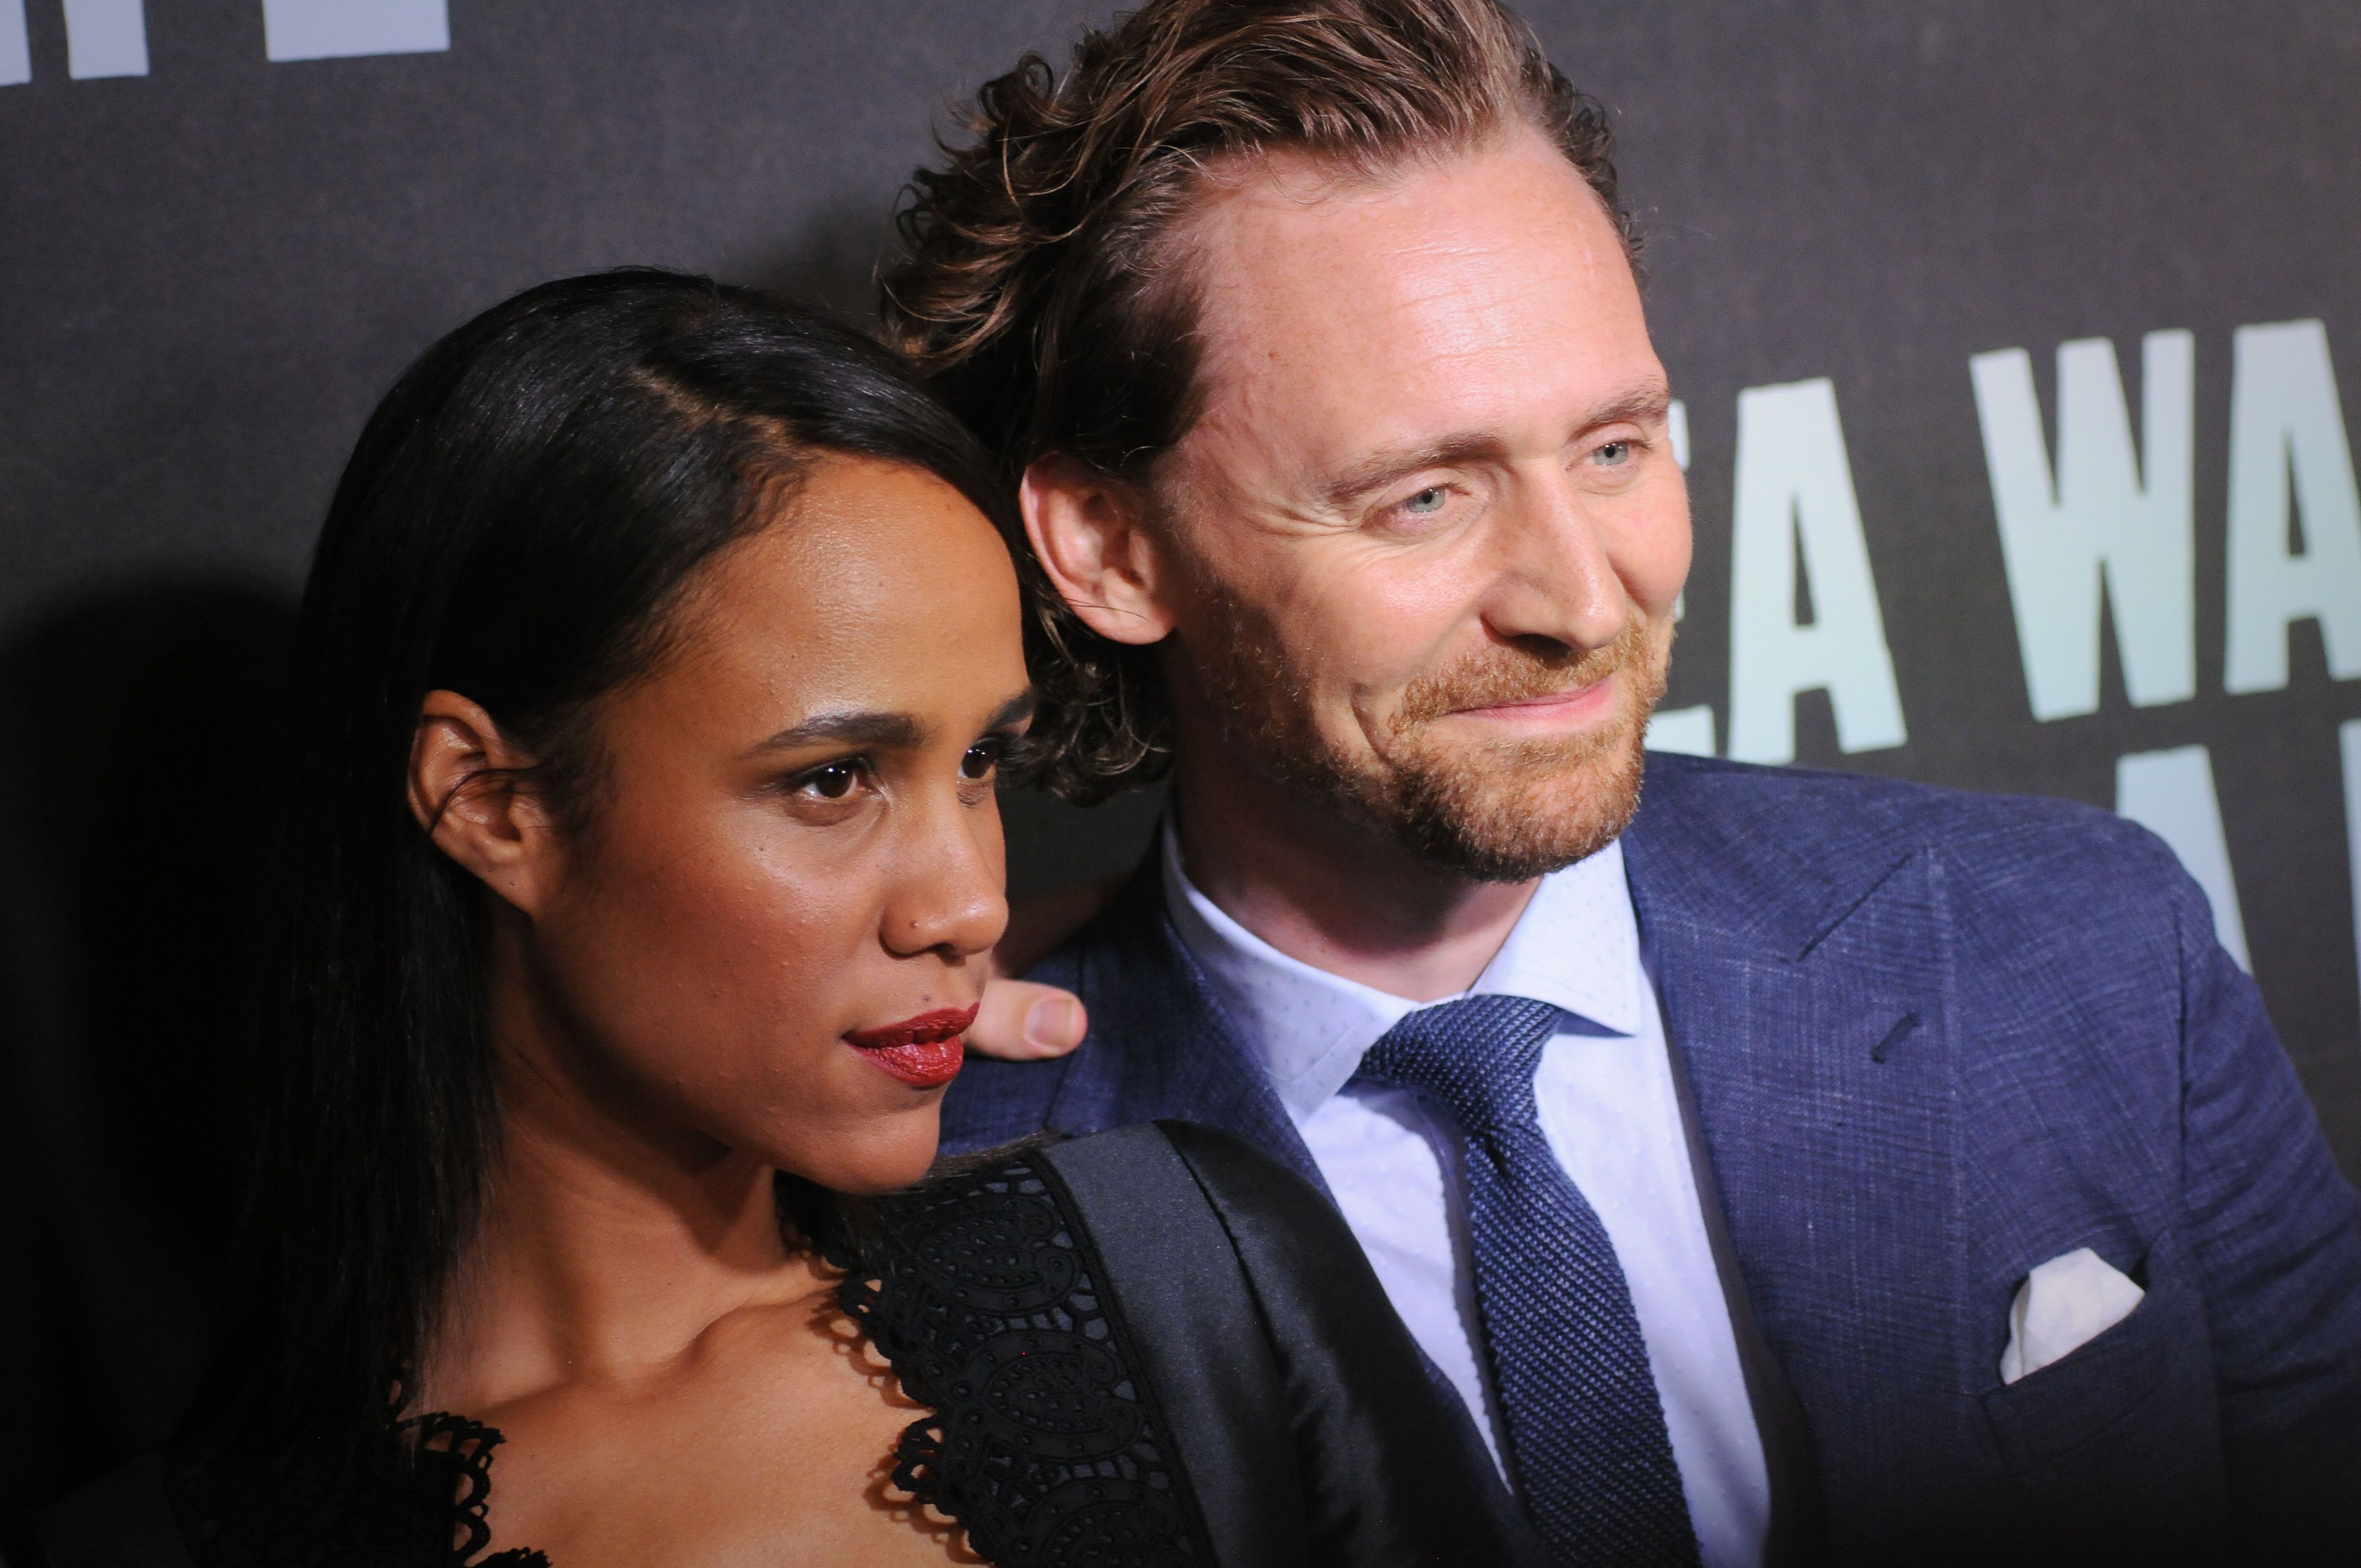 Zawe Ashton and Tom HIddleston during the "Sea Wall / A Life" Broadway Opening Night at the Hudson Theater in New York | Source: Getty Images